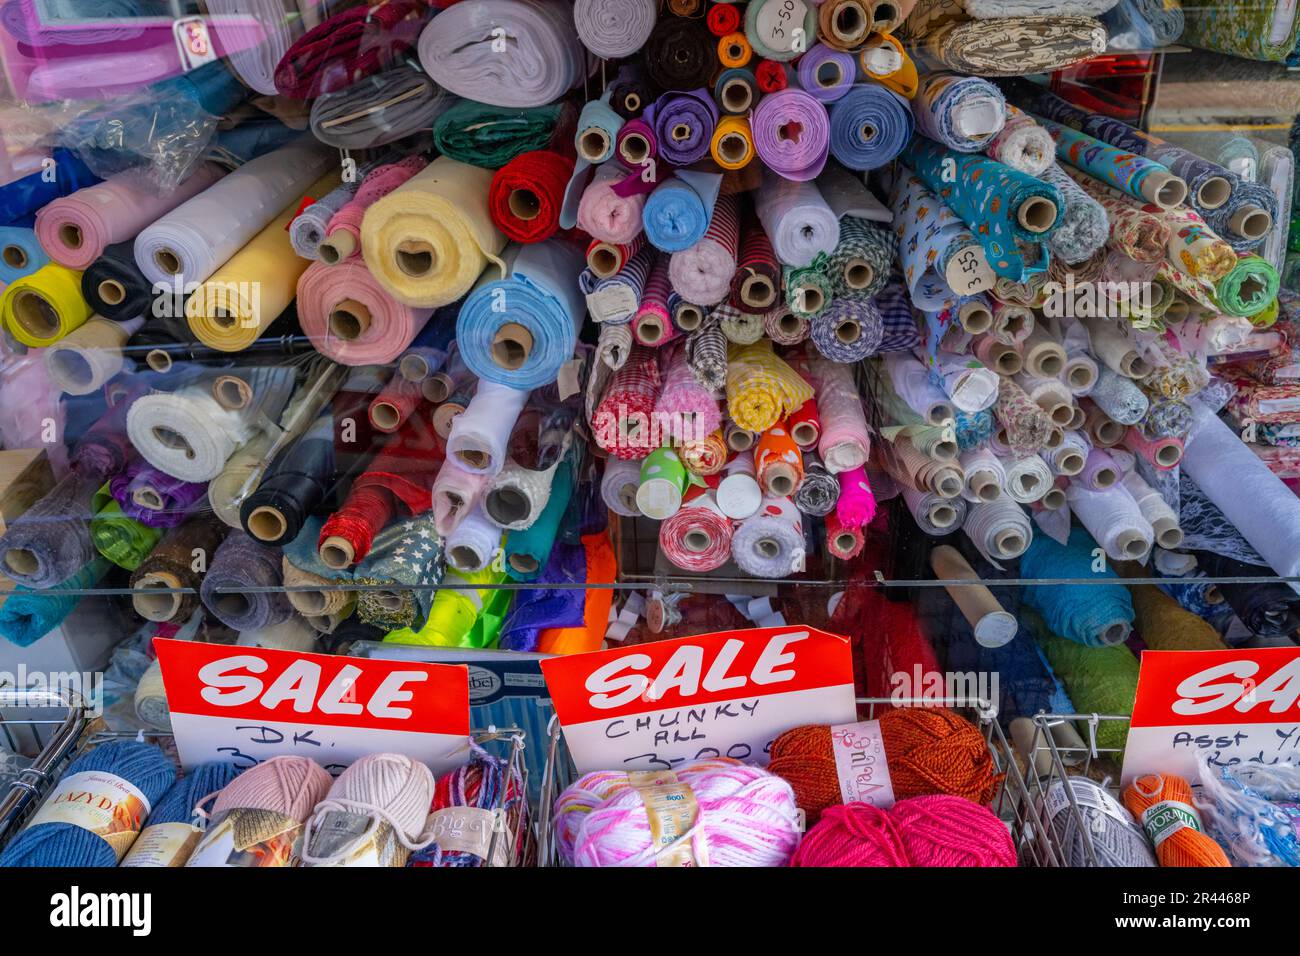 Rolls of fabric and balls of yearn in a shop window Gravesend Kent Stock Photo